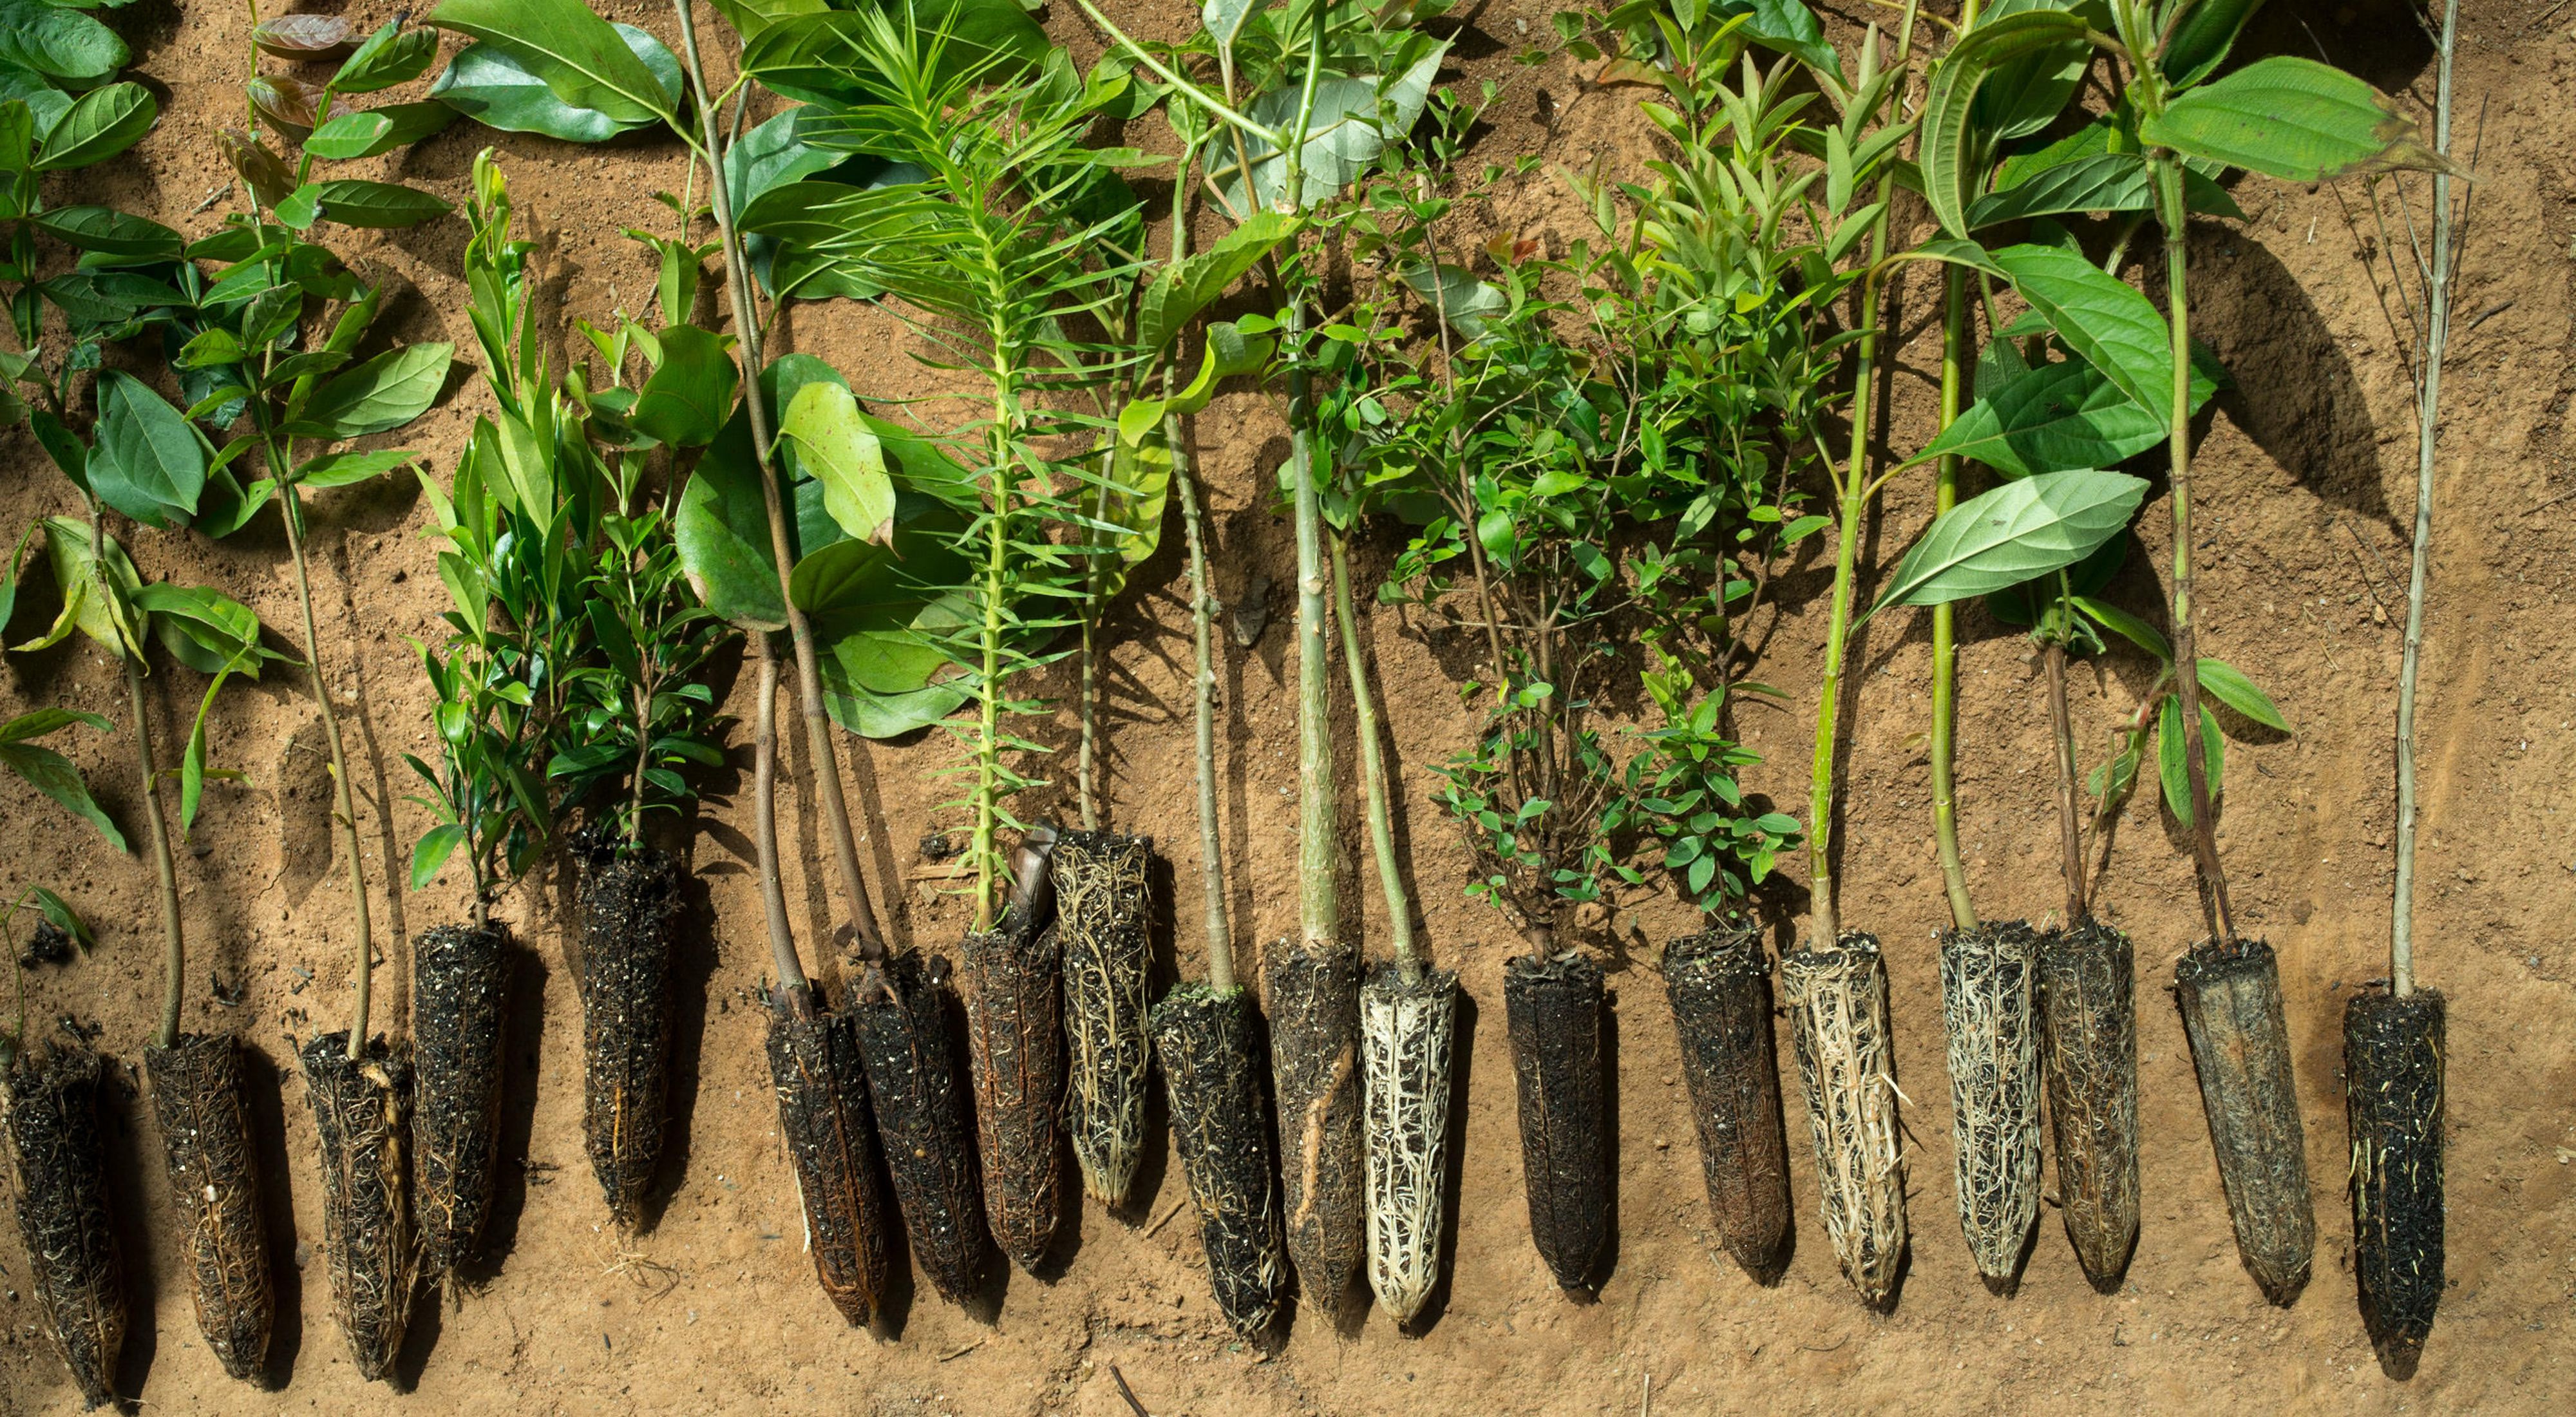 A collection of native tree saplings.